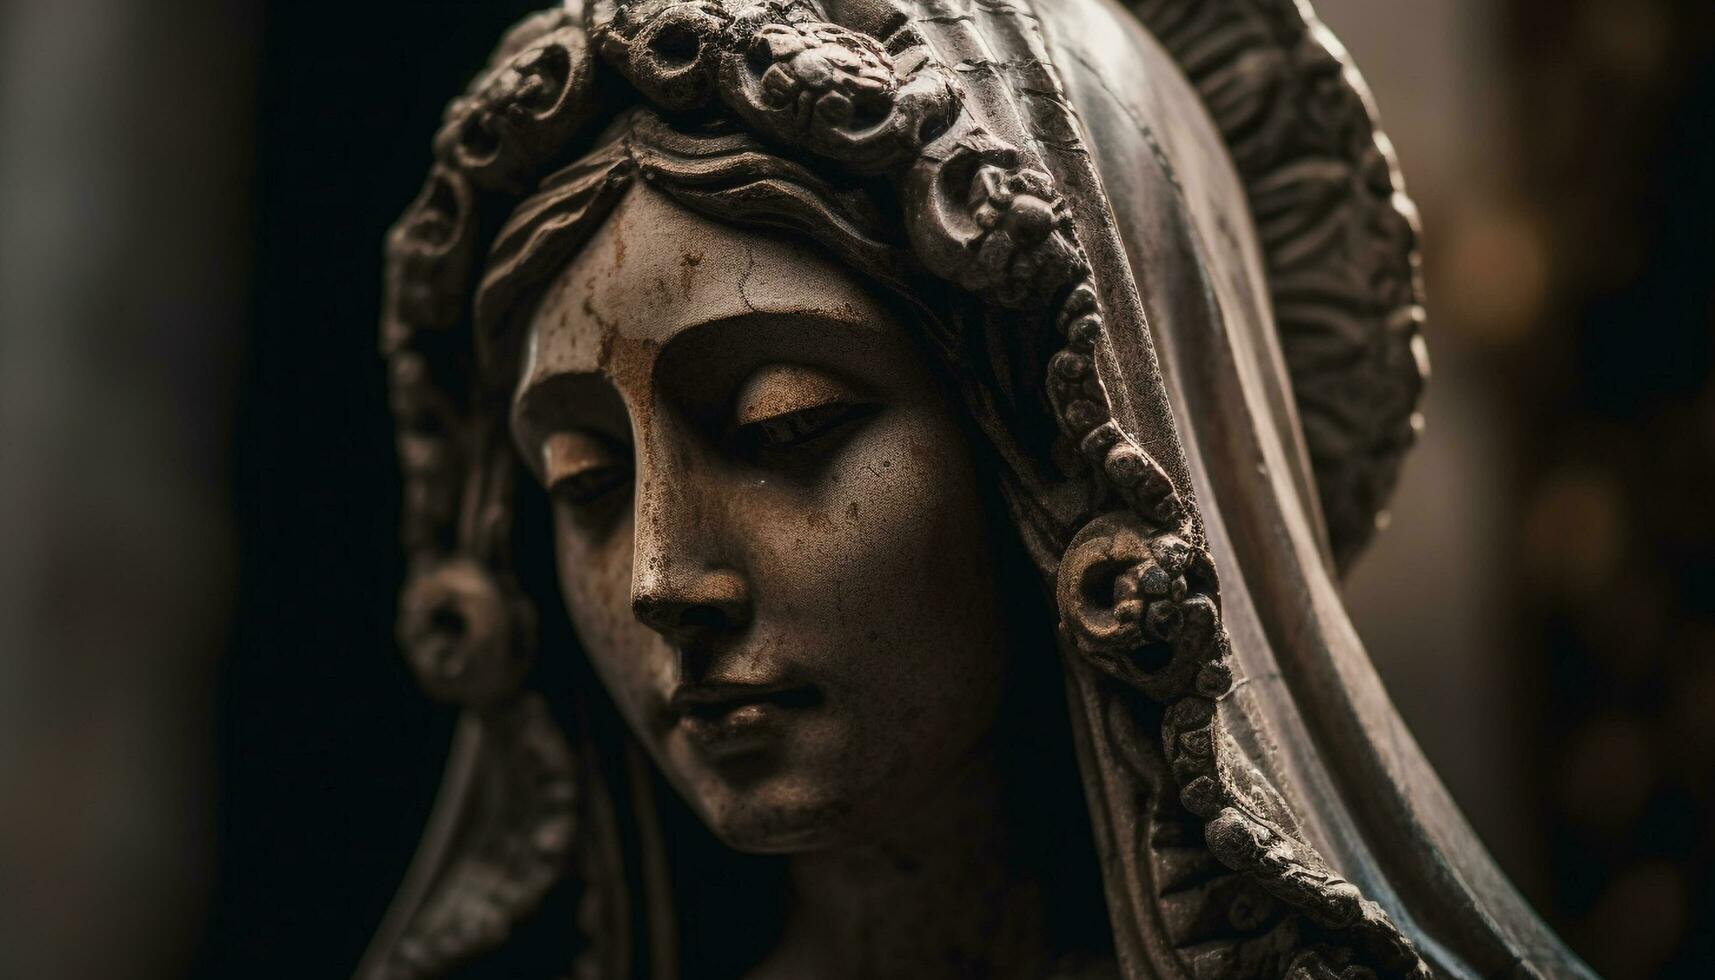 Religion elegance and beauty captured in ancient sculpture decoration generated by AI photo